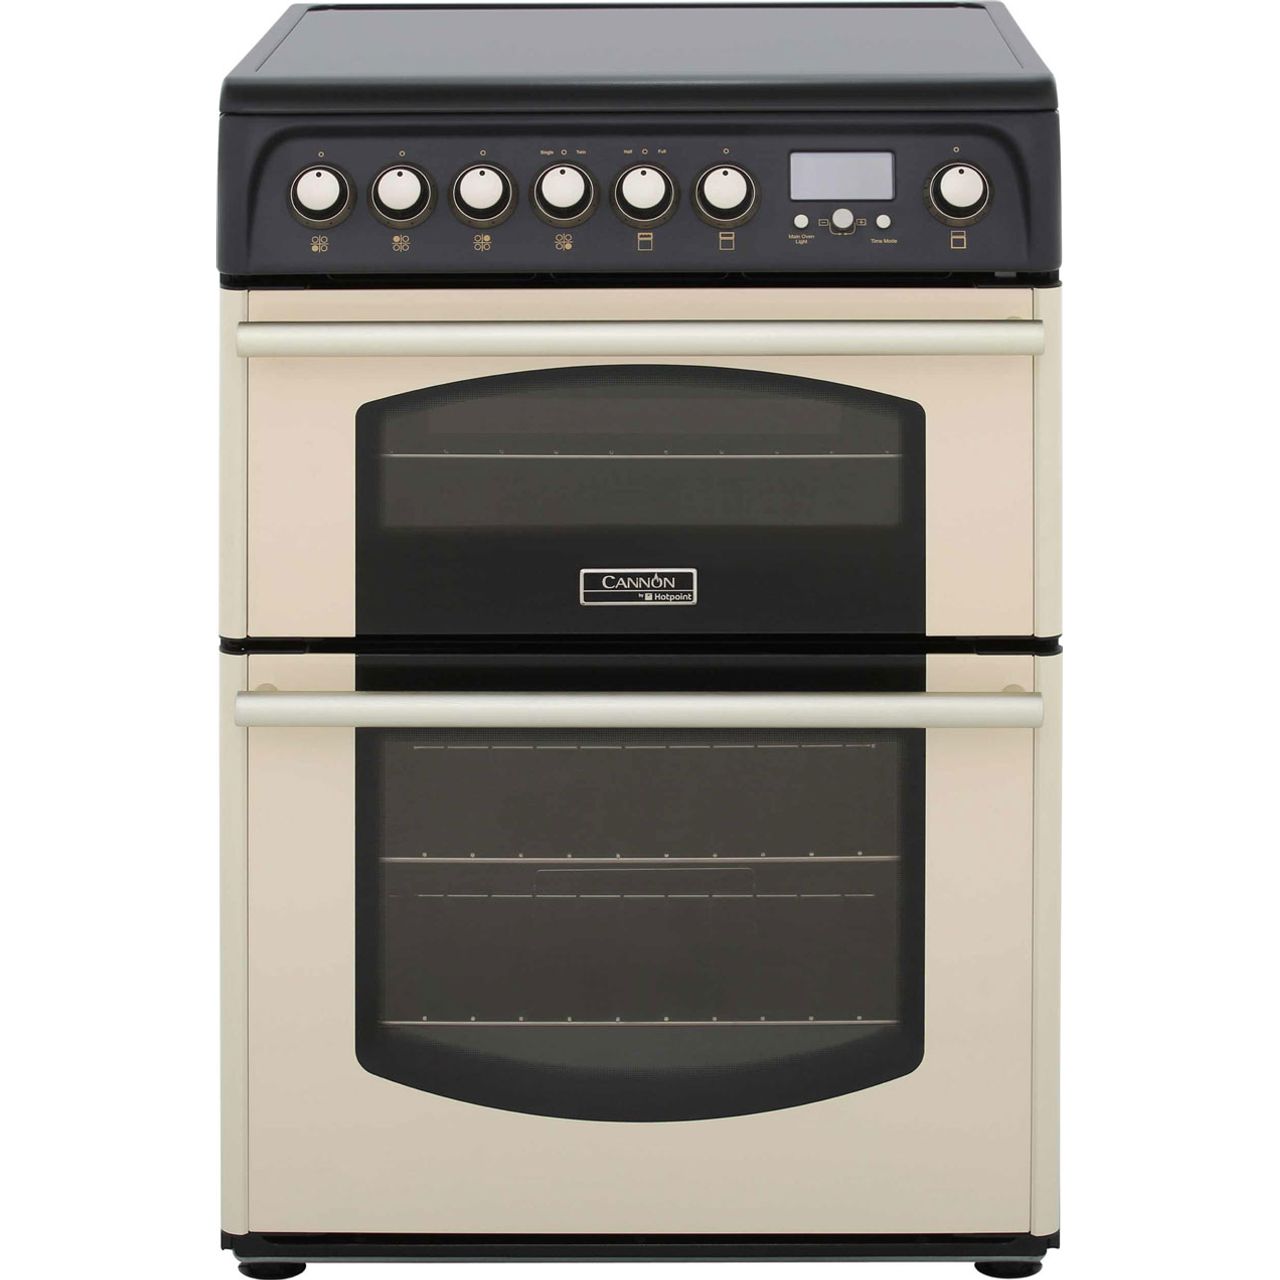 single oven freestanding electric cookers